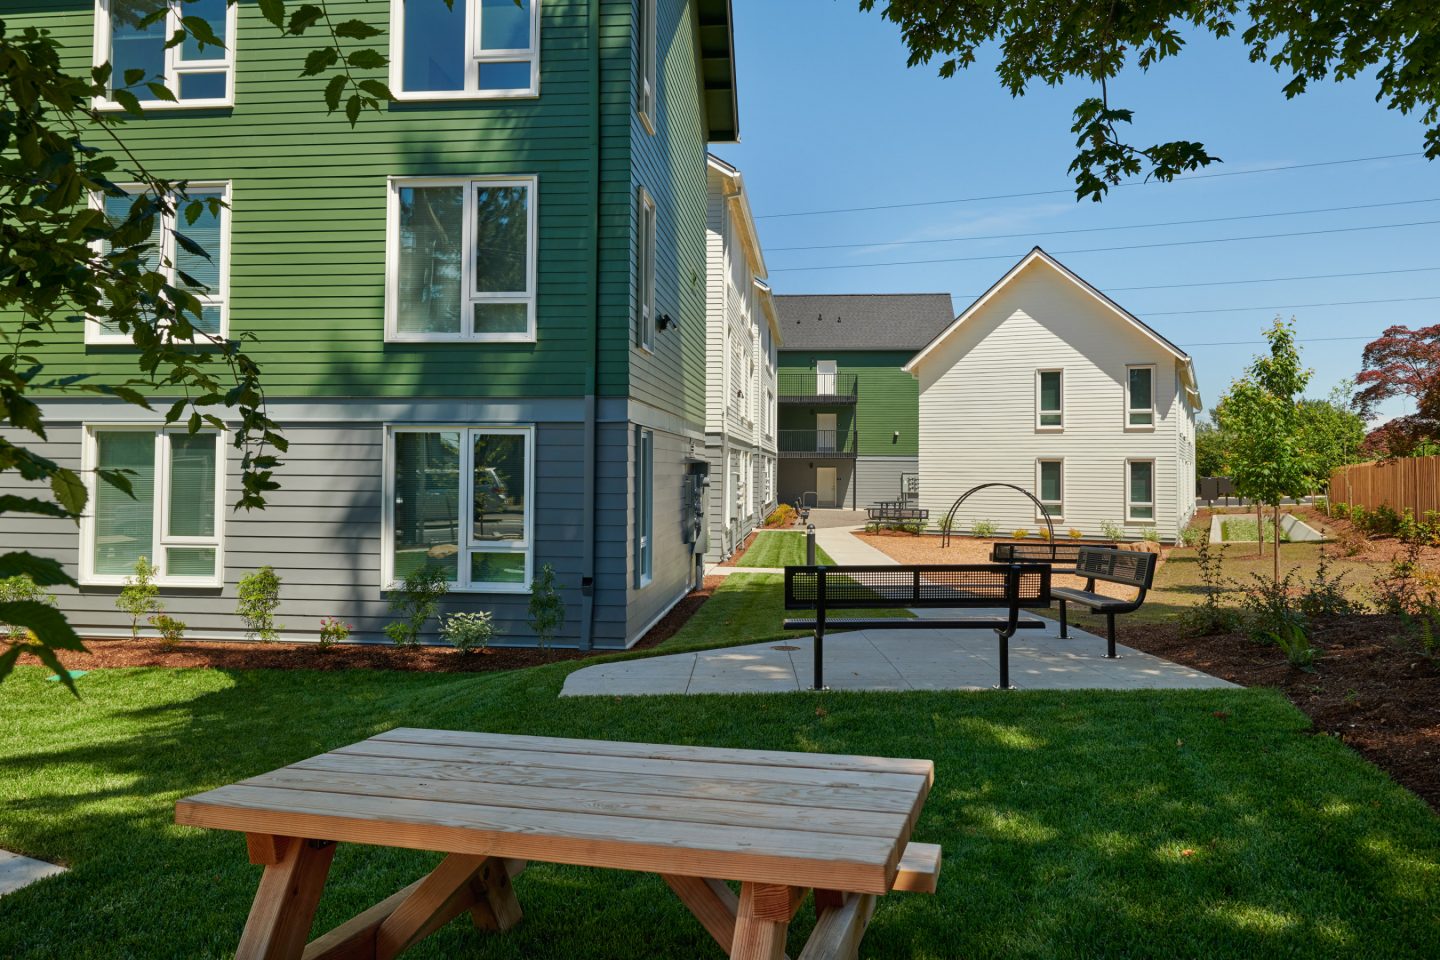 Nestled Between Apartment Buildings, A Shaded Picnic Table Sits on A Bed Of Bright Green Grass In The Courtyard.